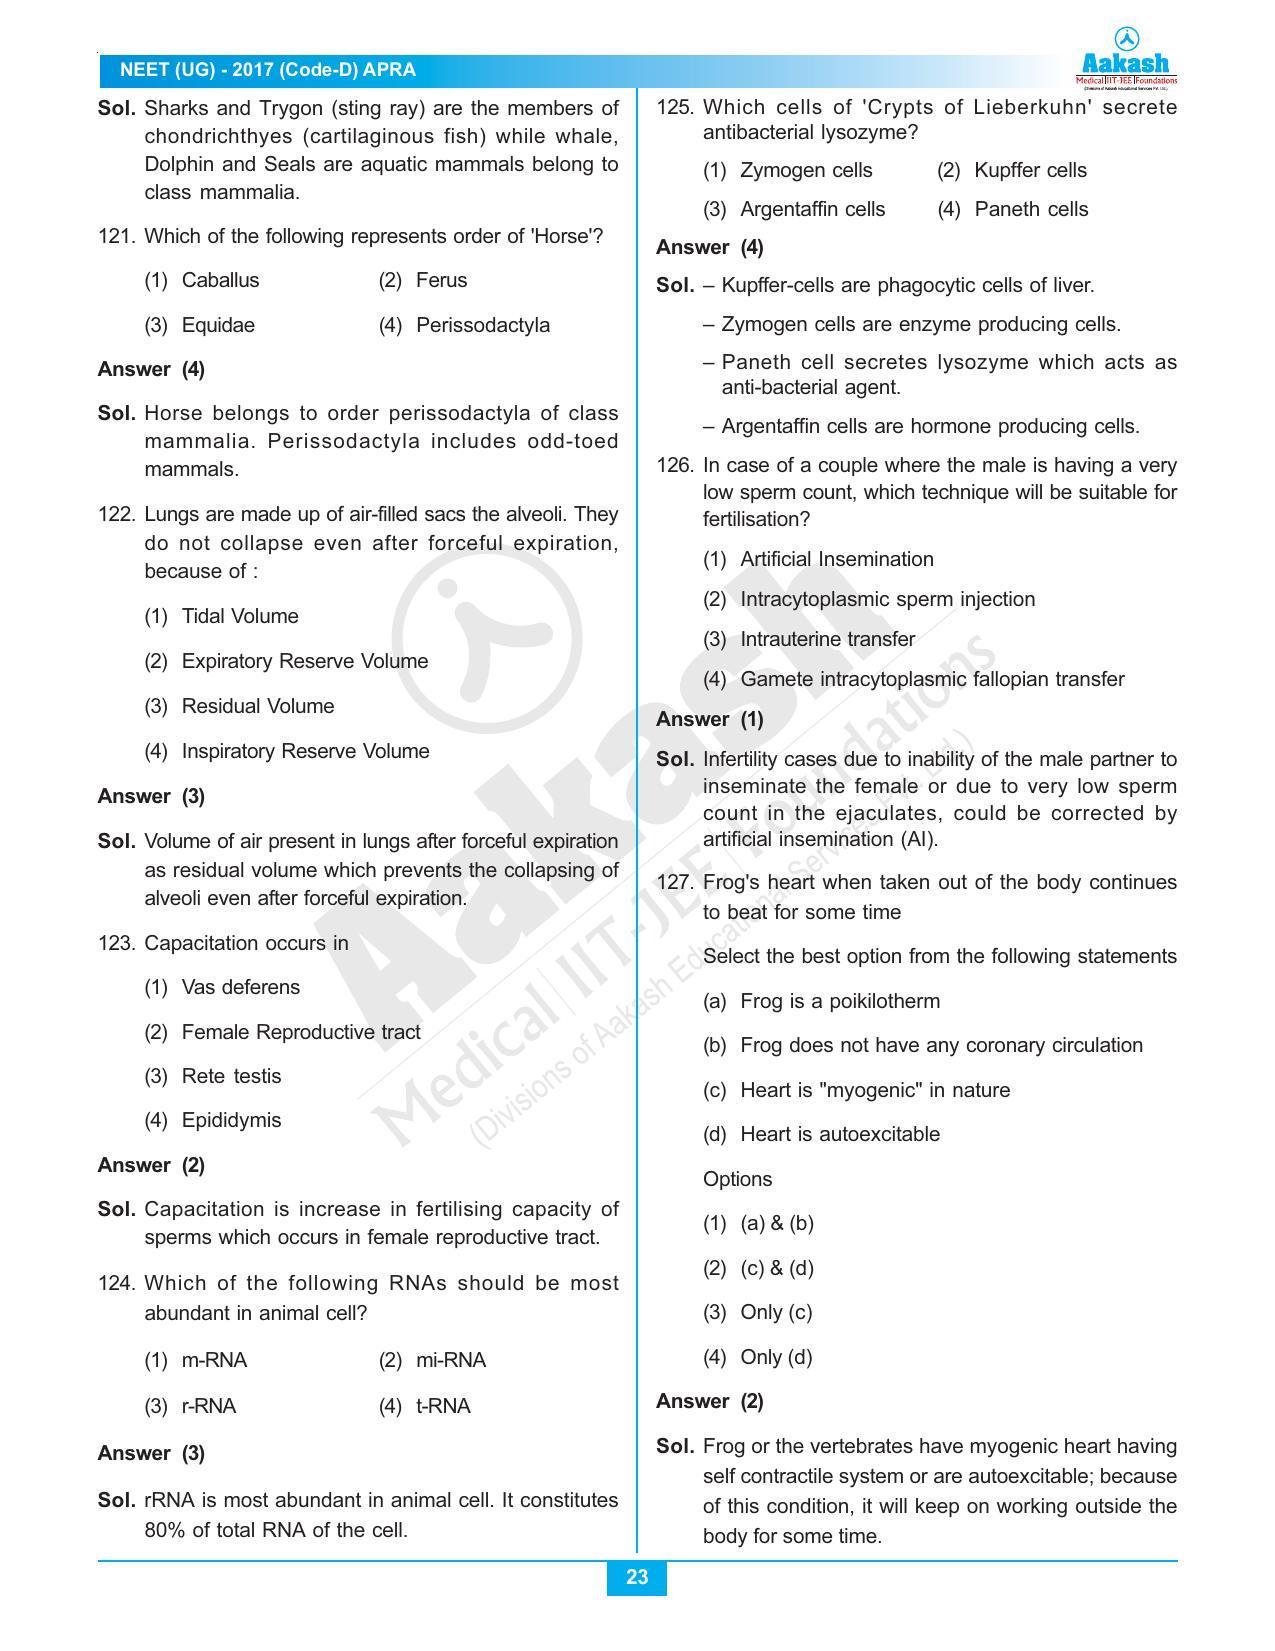  NEET Code D 2017 Answer & Solutions - Page 23